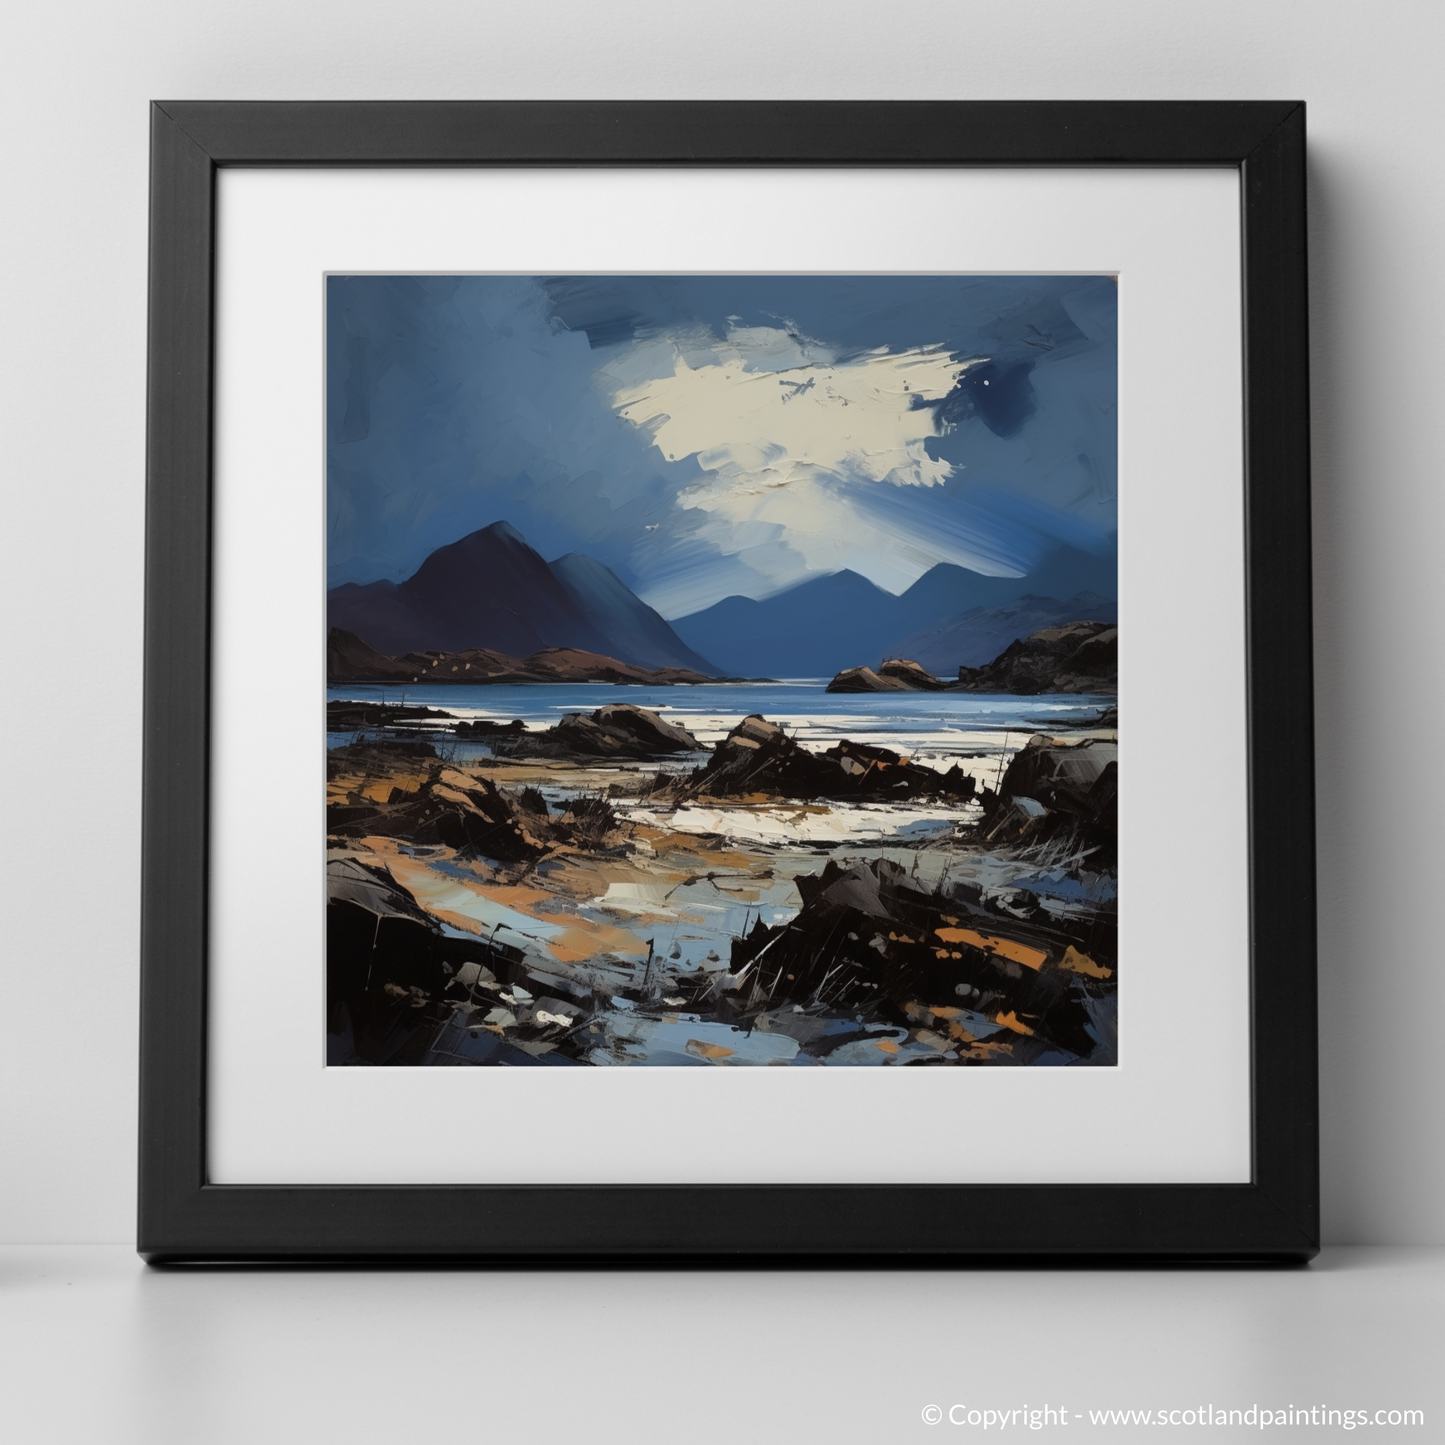 Art Print of Isle of Rum, Inner Hebrides with a black frame